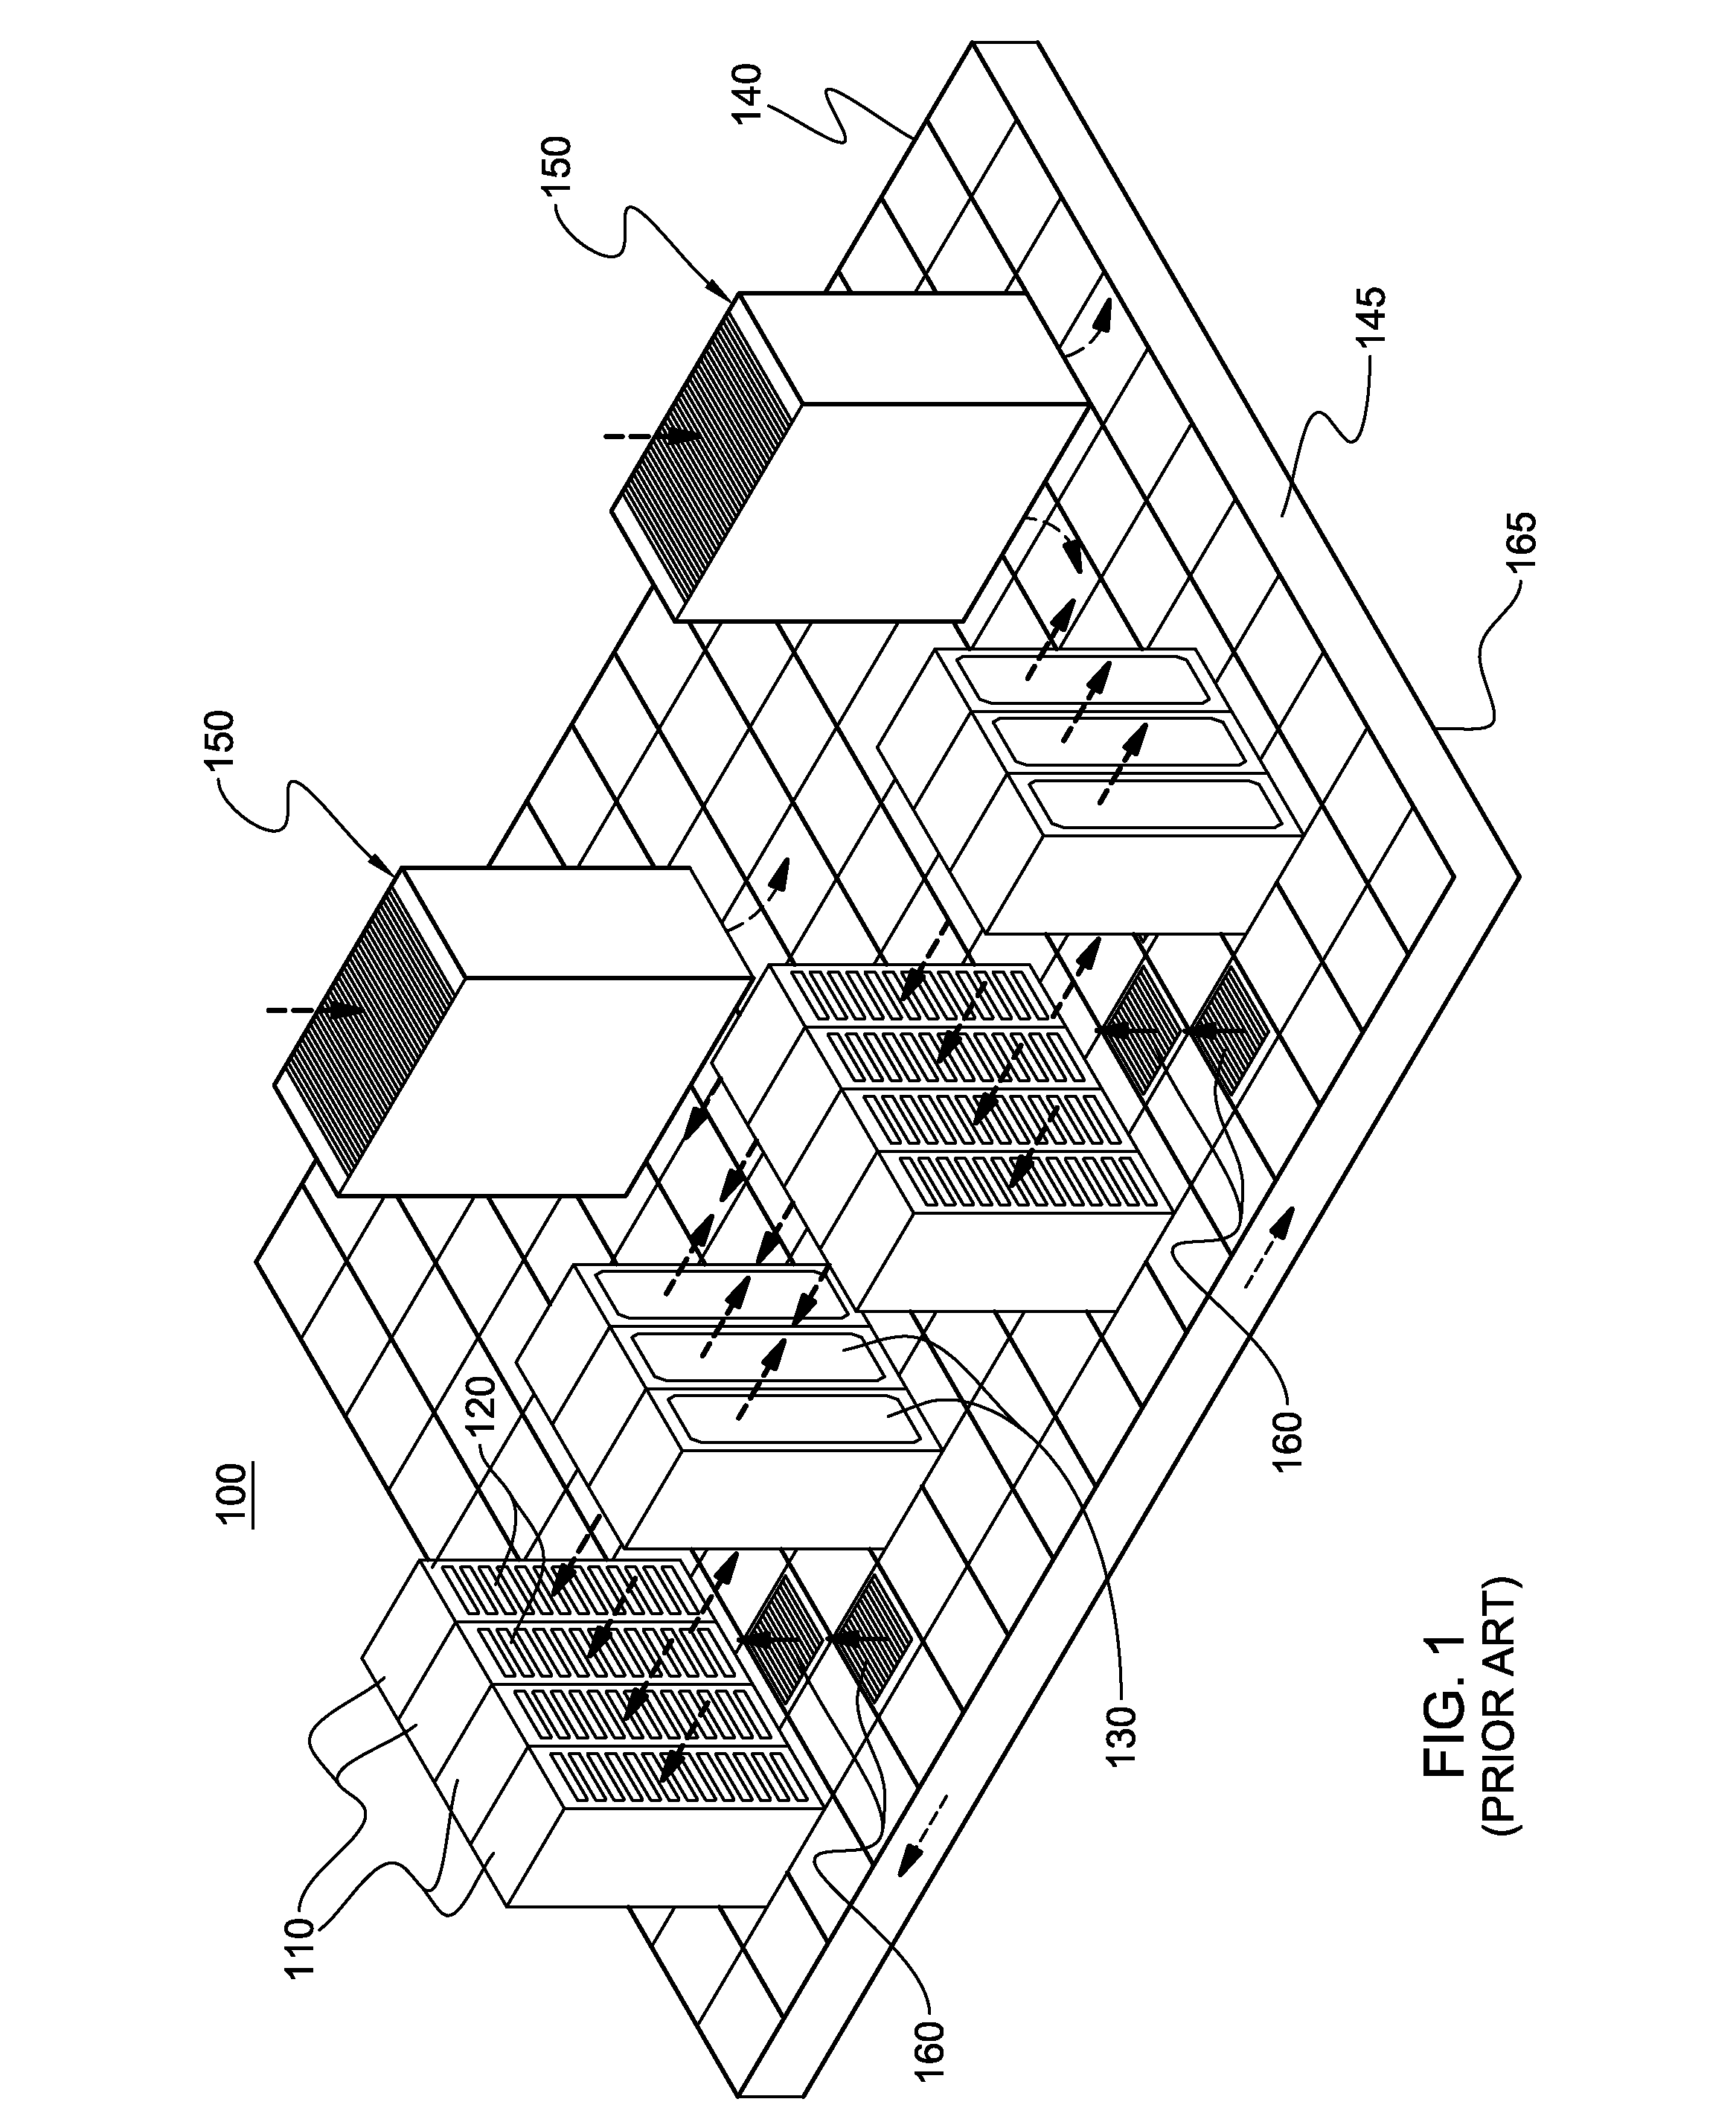 Thermoelectric-enhanced, vapor-compression refrigeration method facilitating cooling of an electronic component